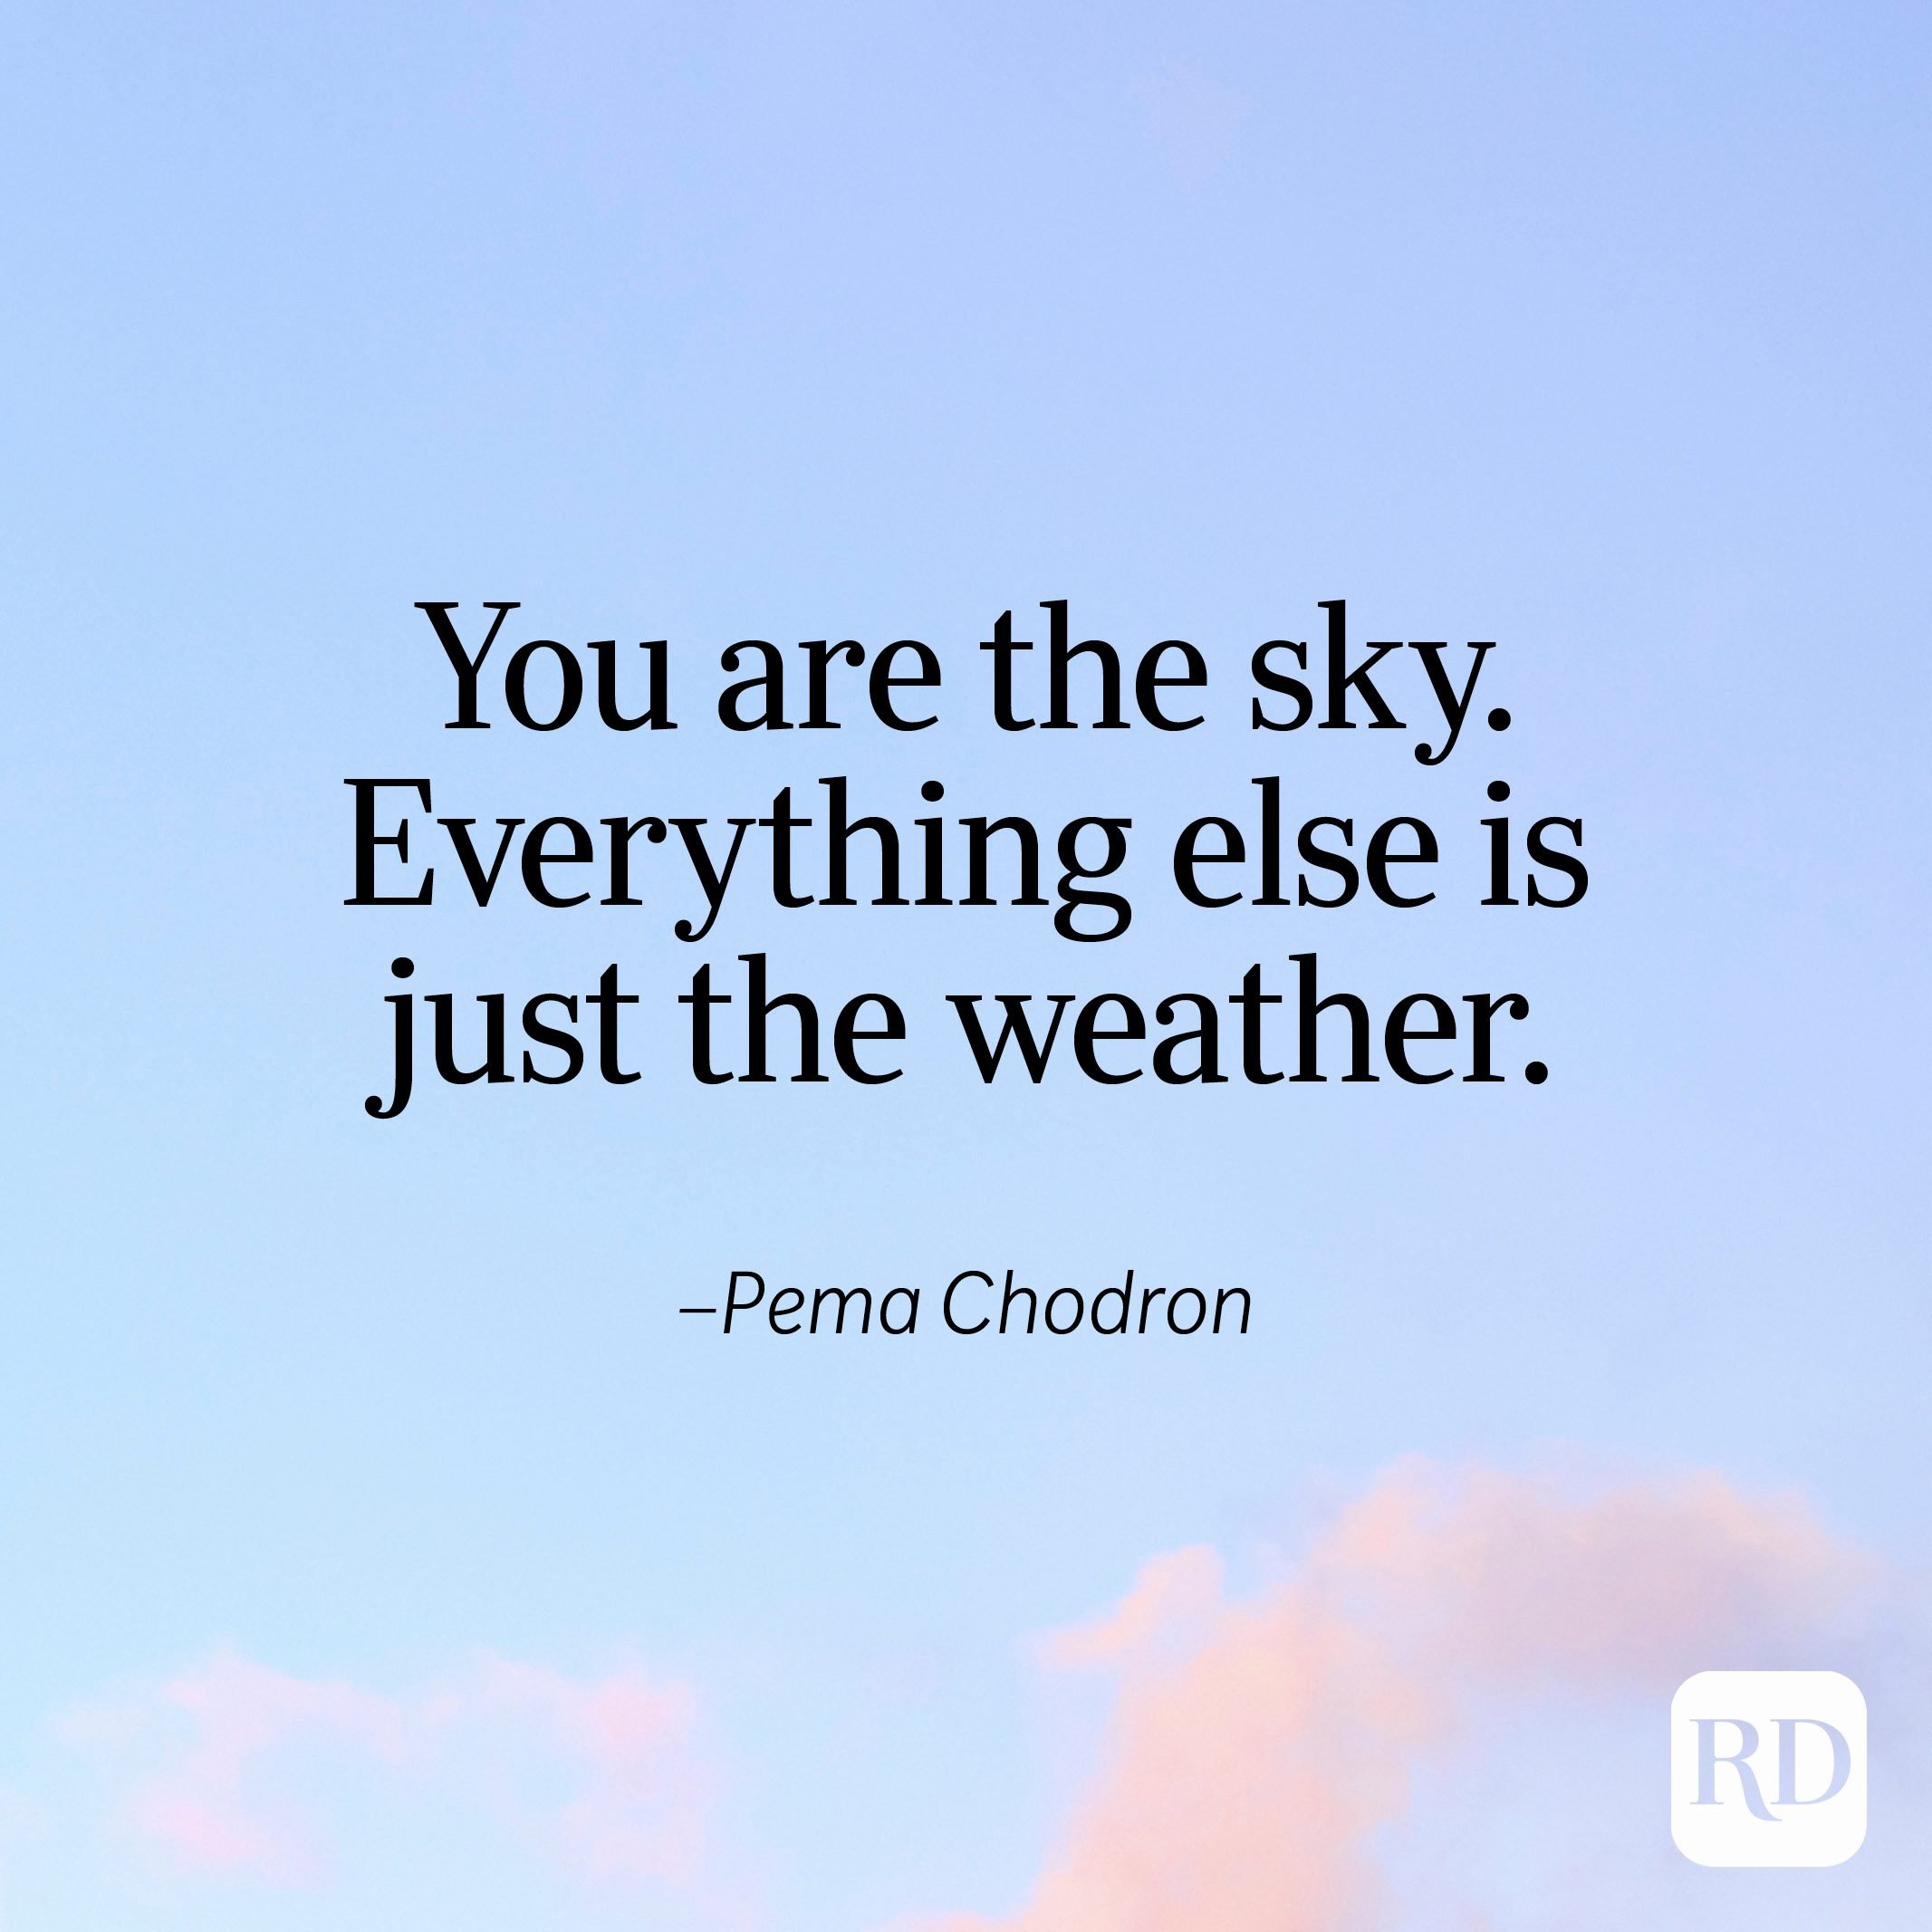 "You are the sky. Everything else is just the weather." —Pema Chodron